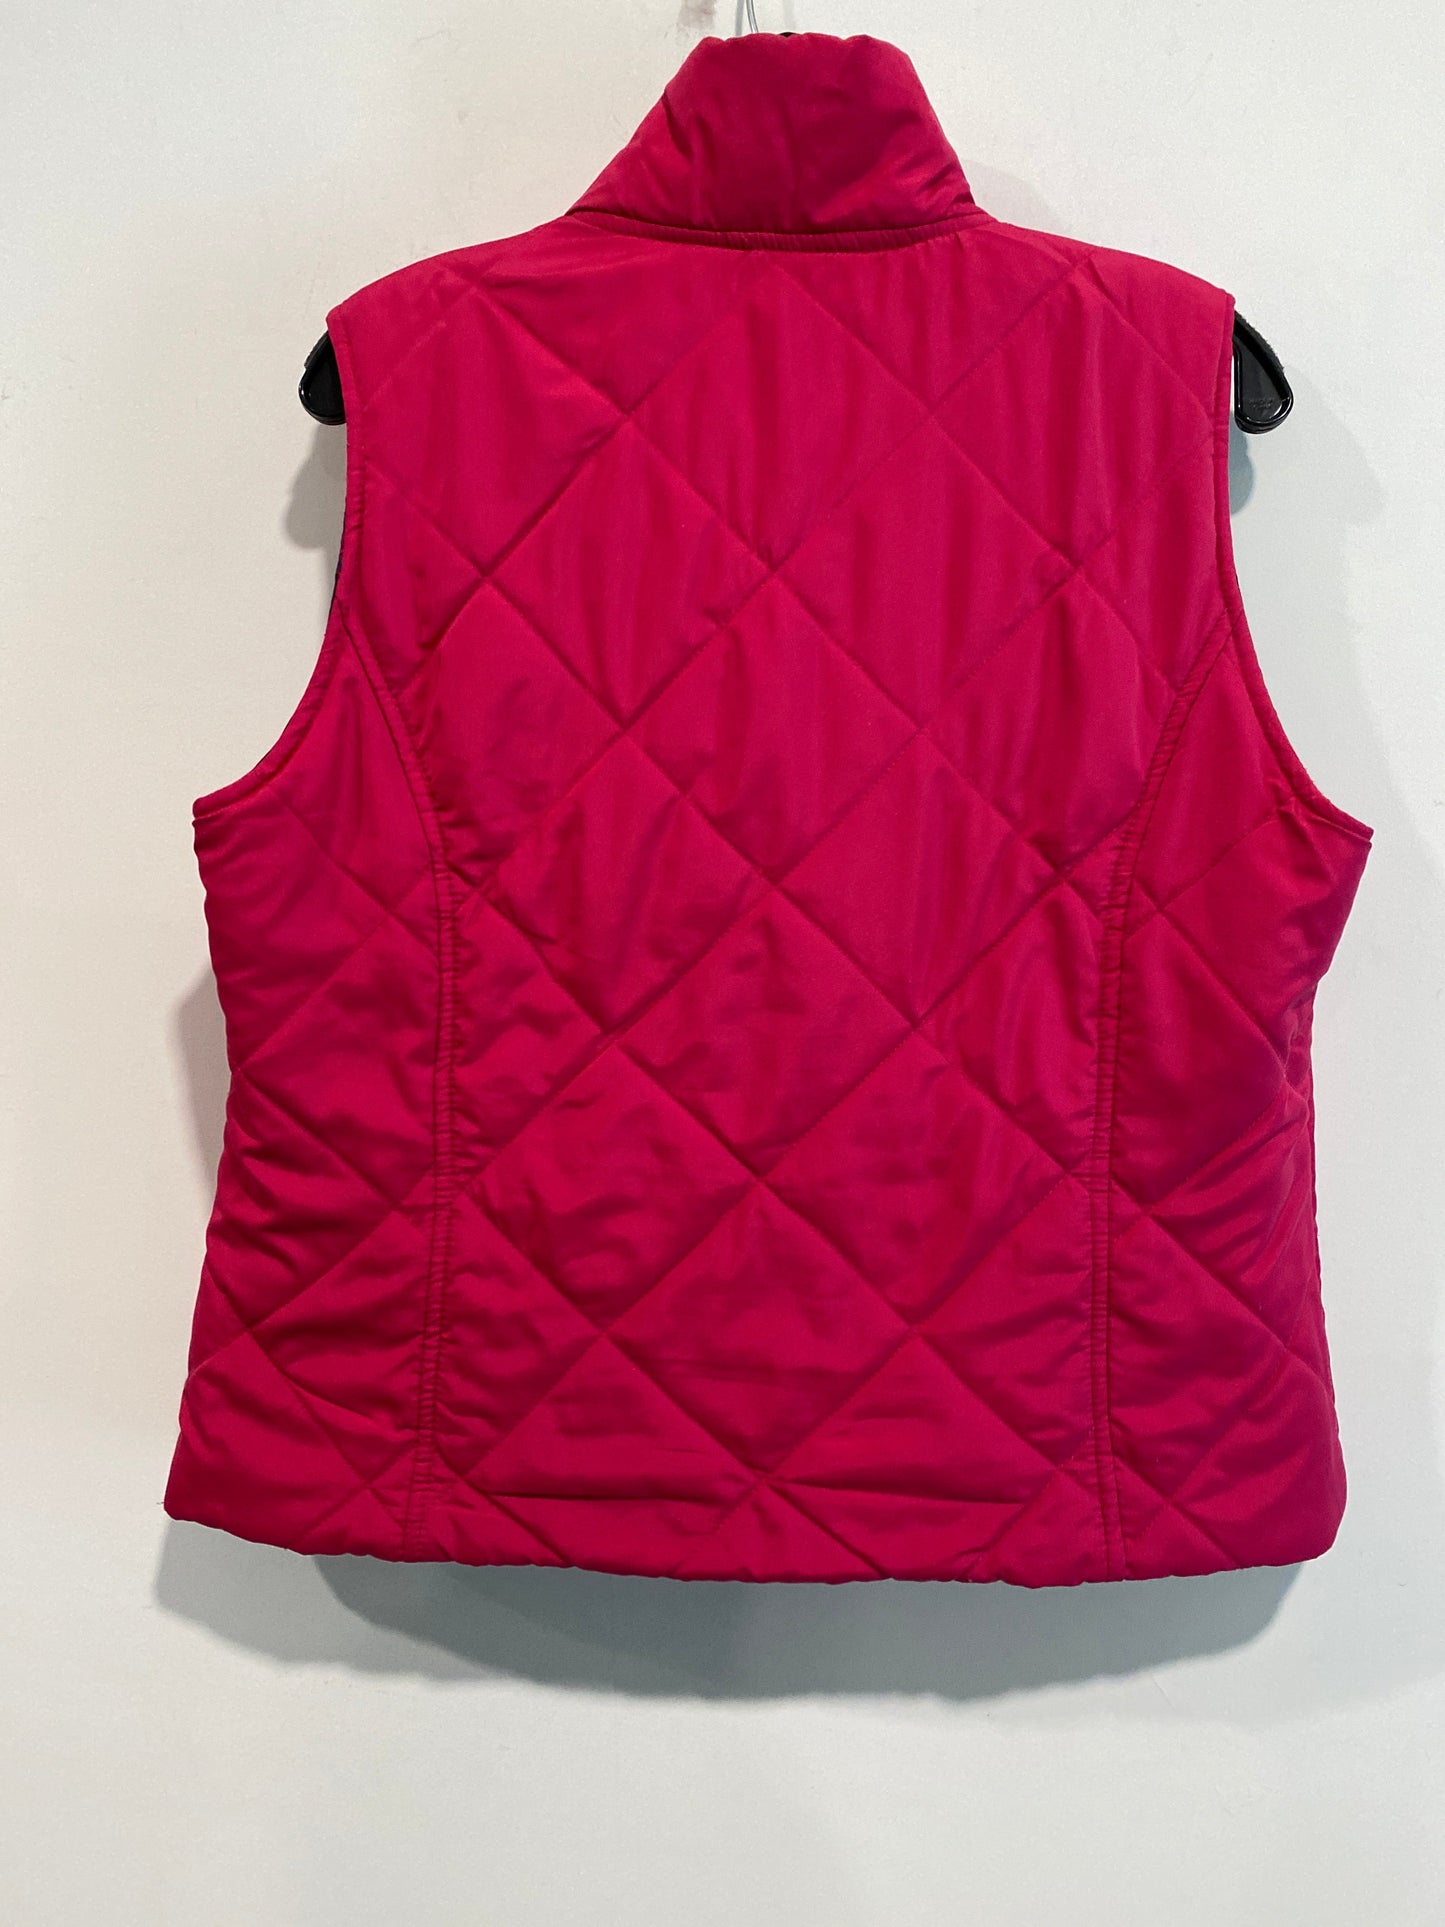 Vest Other By Sjb Active  Size: L